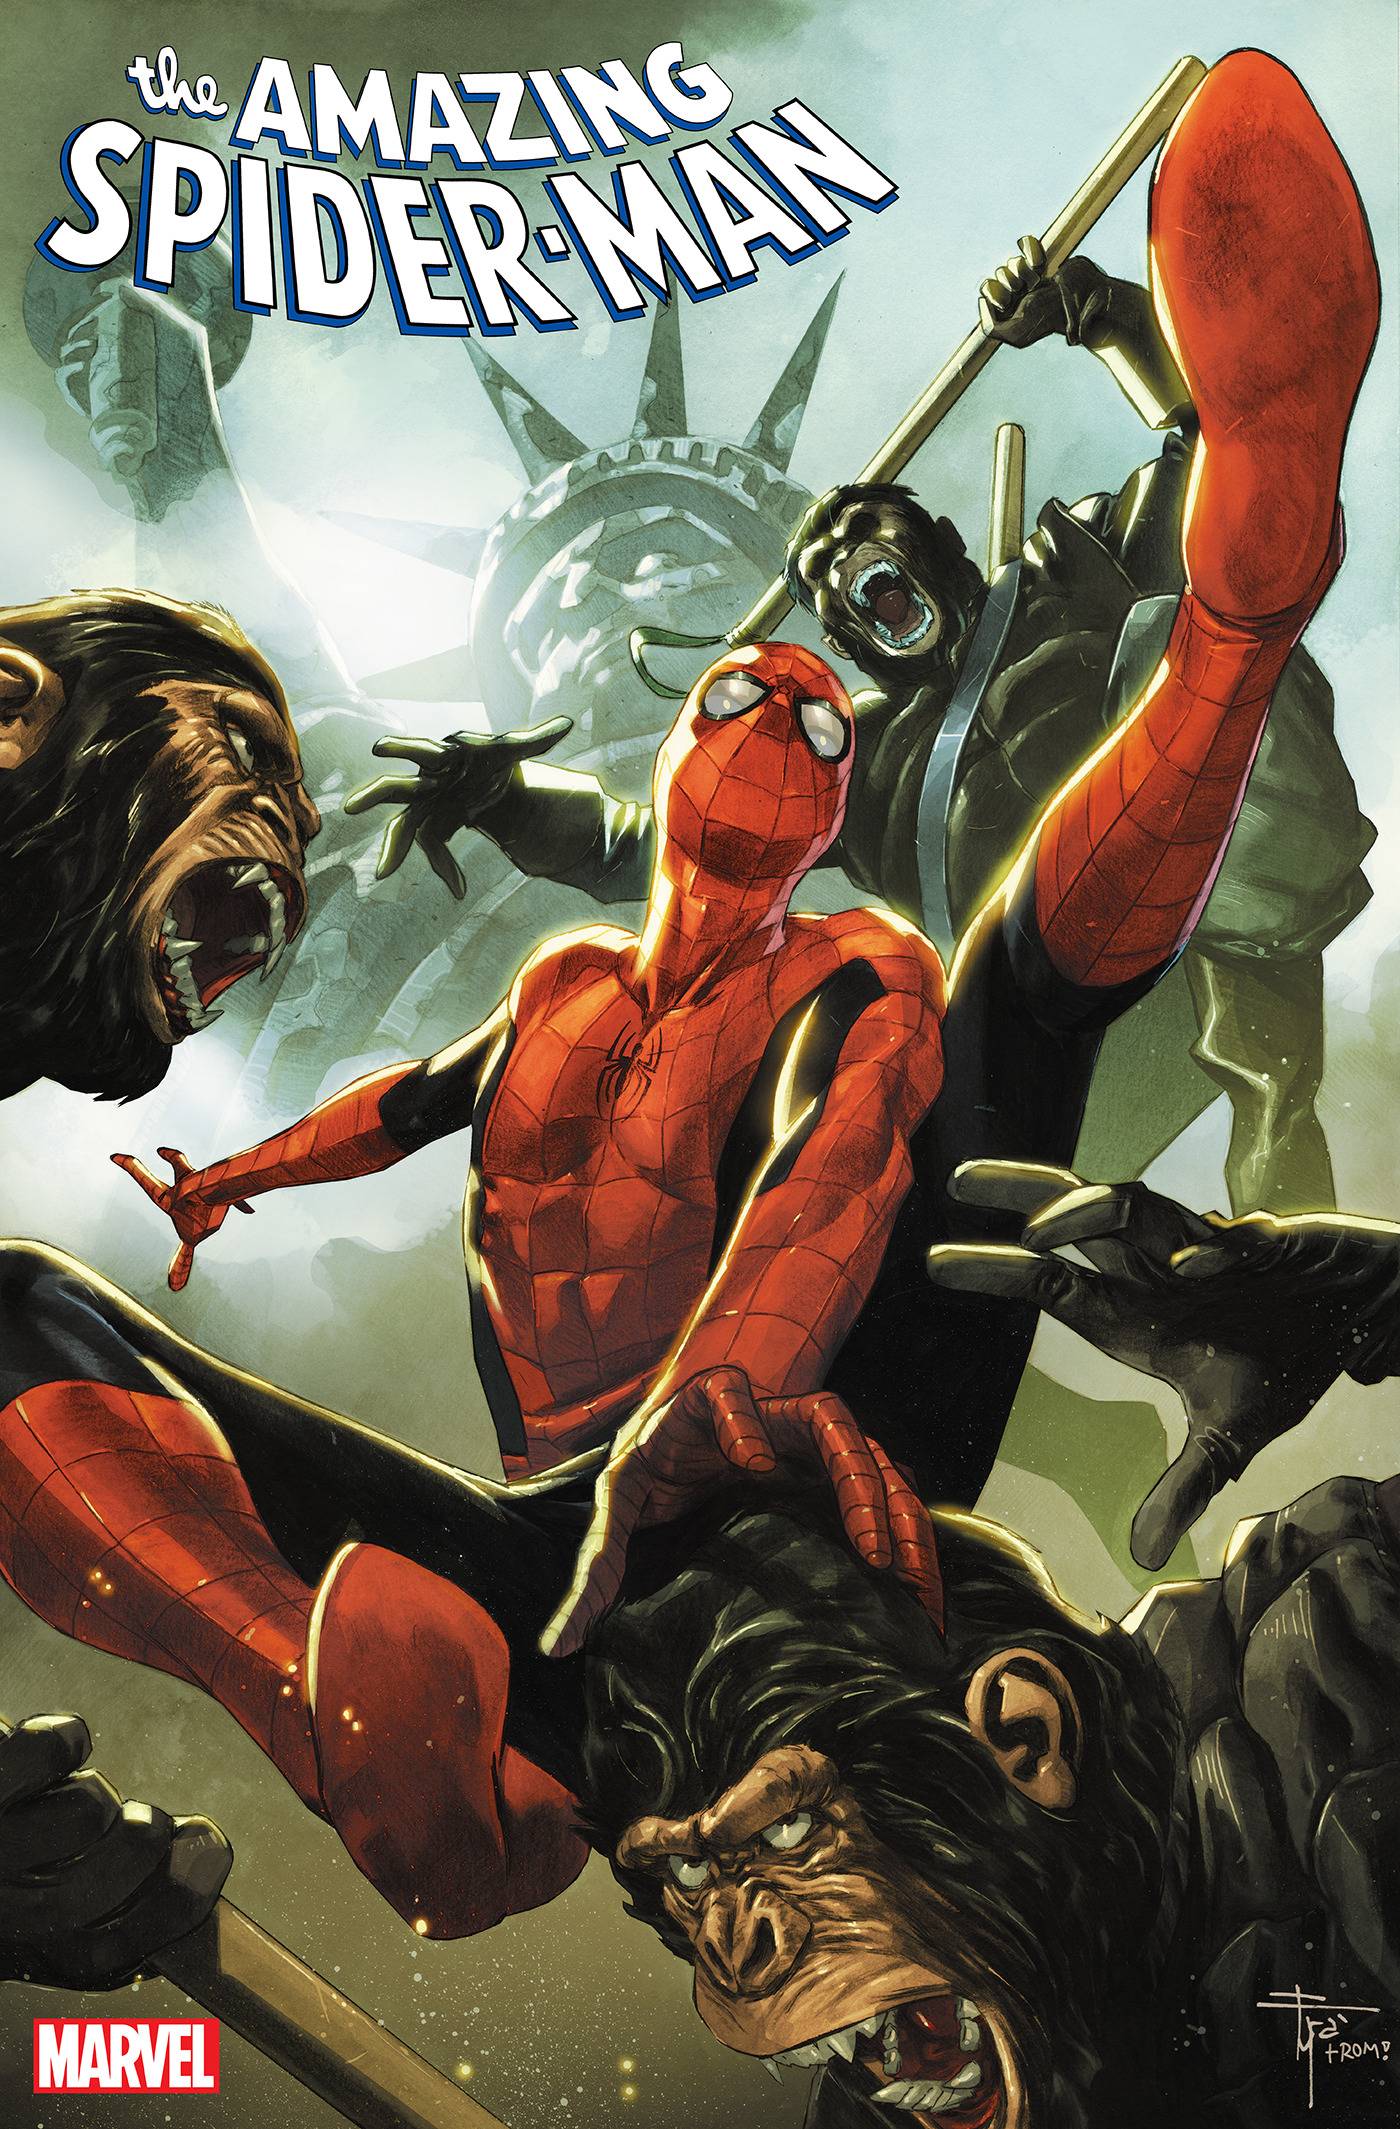 AMAZING SPIDER-MAN #19 MOBILI PLANET OF THE APES VAR